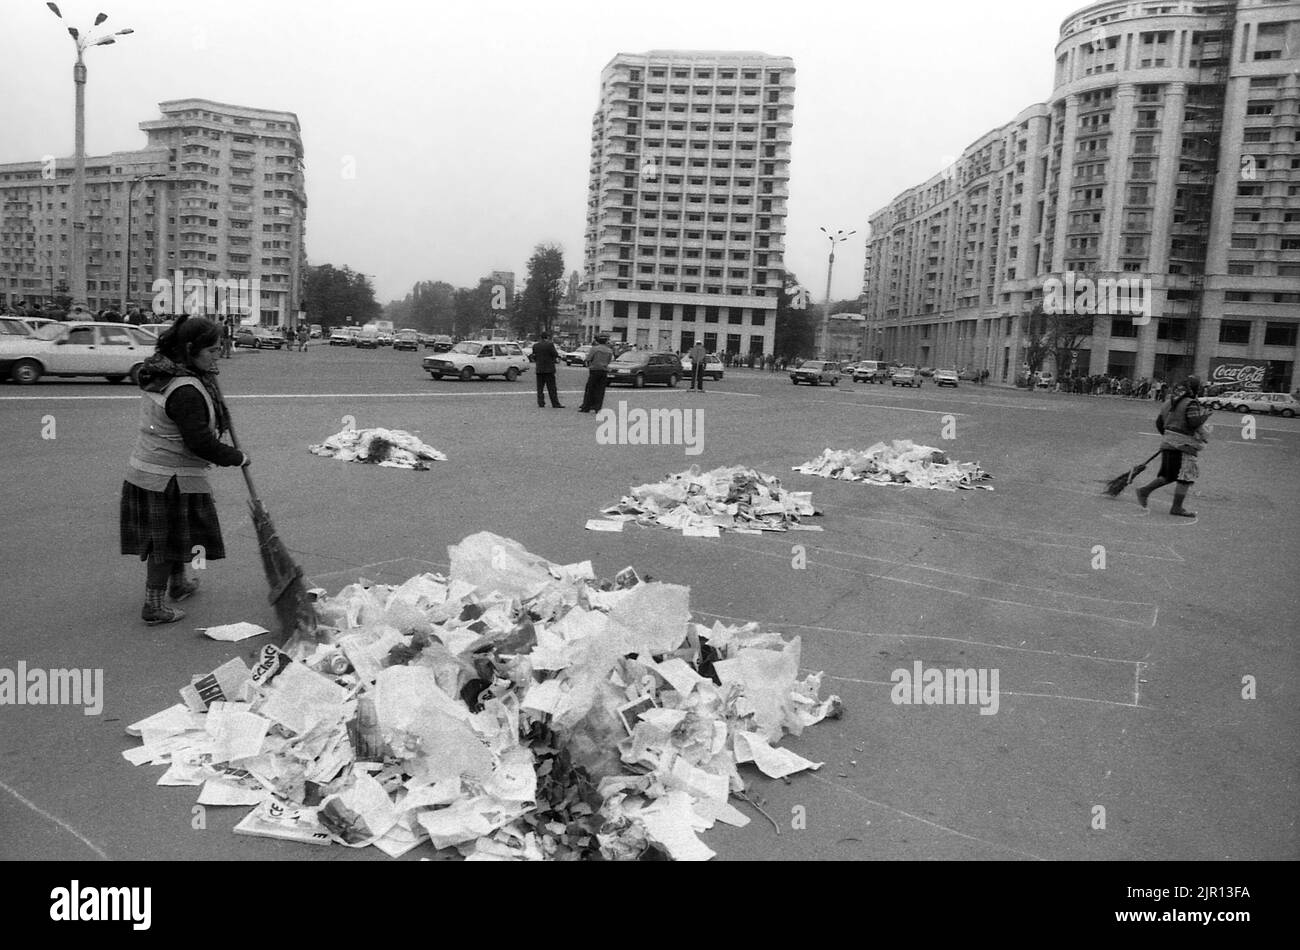 Bucharest, Romania, January 1990. Janitors cleaning up the streets in Victoria Square after a series of anti-governmental protests. Stock Photo